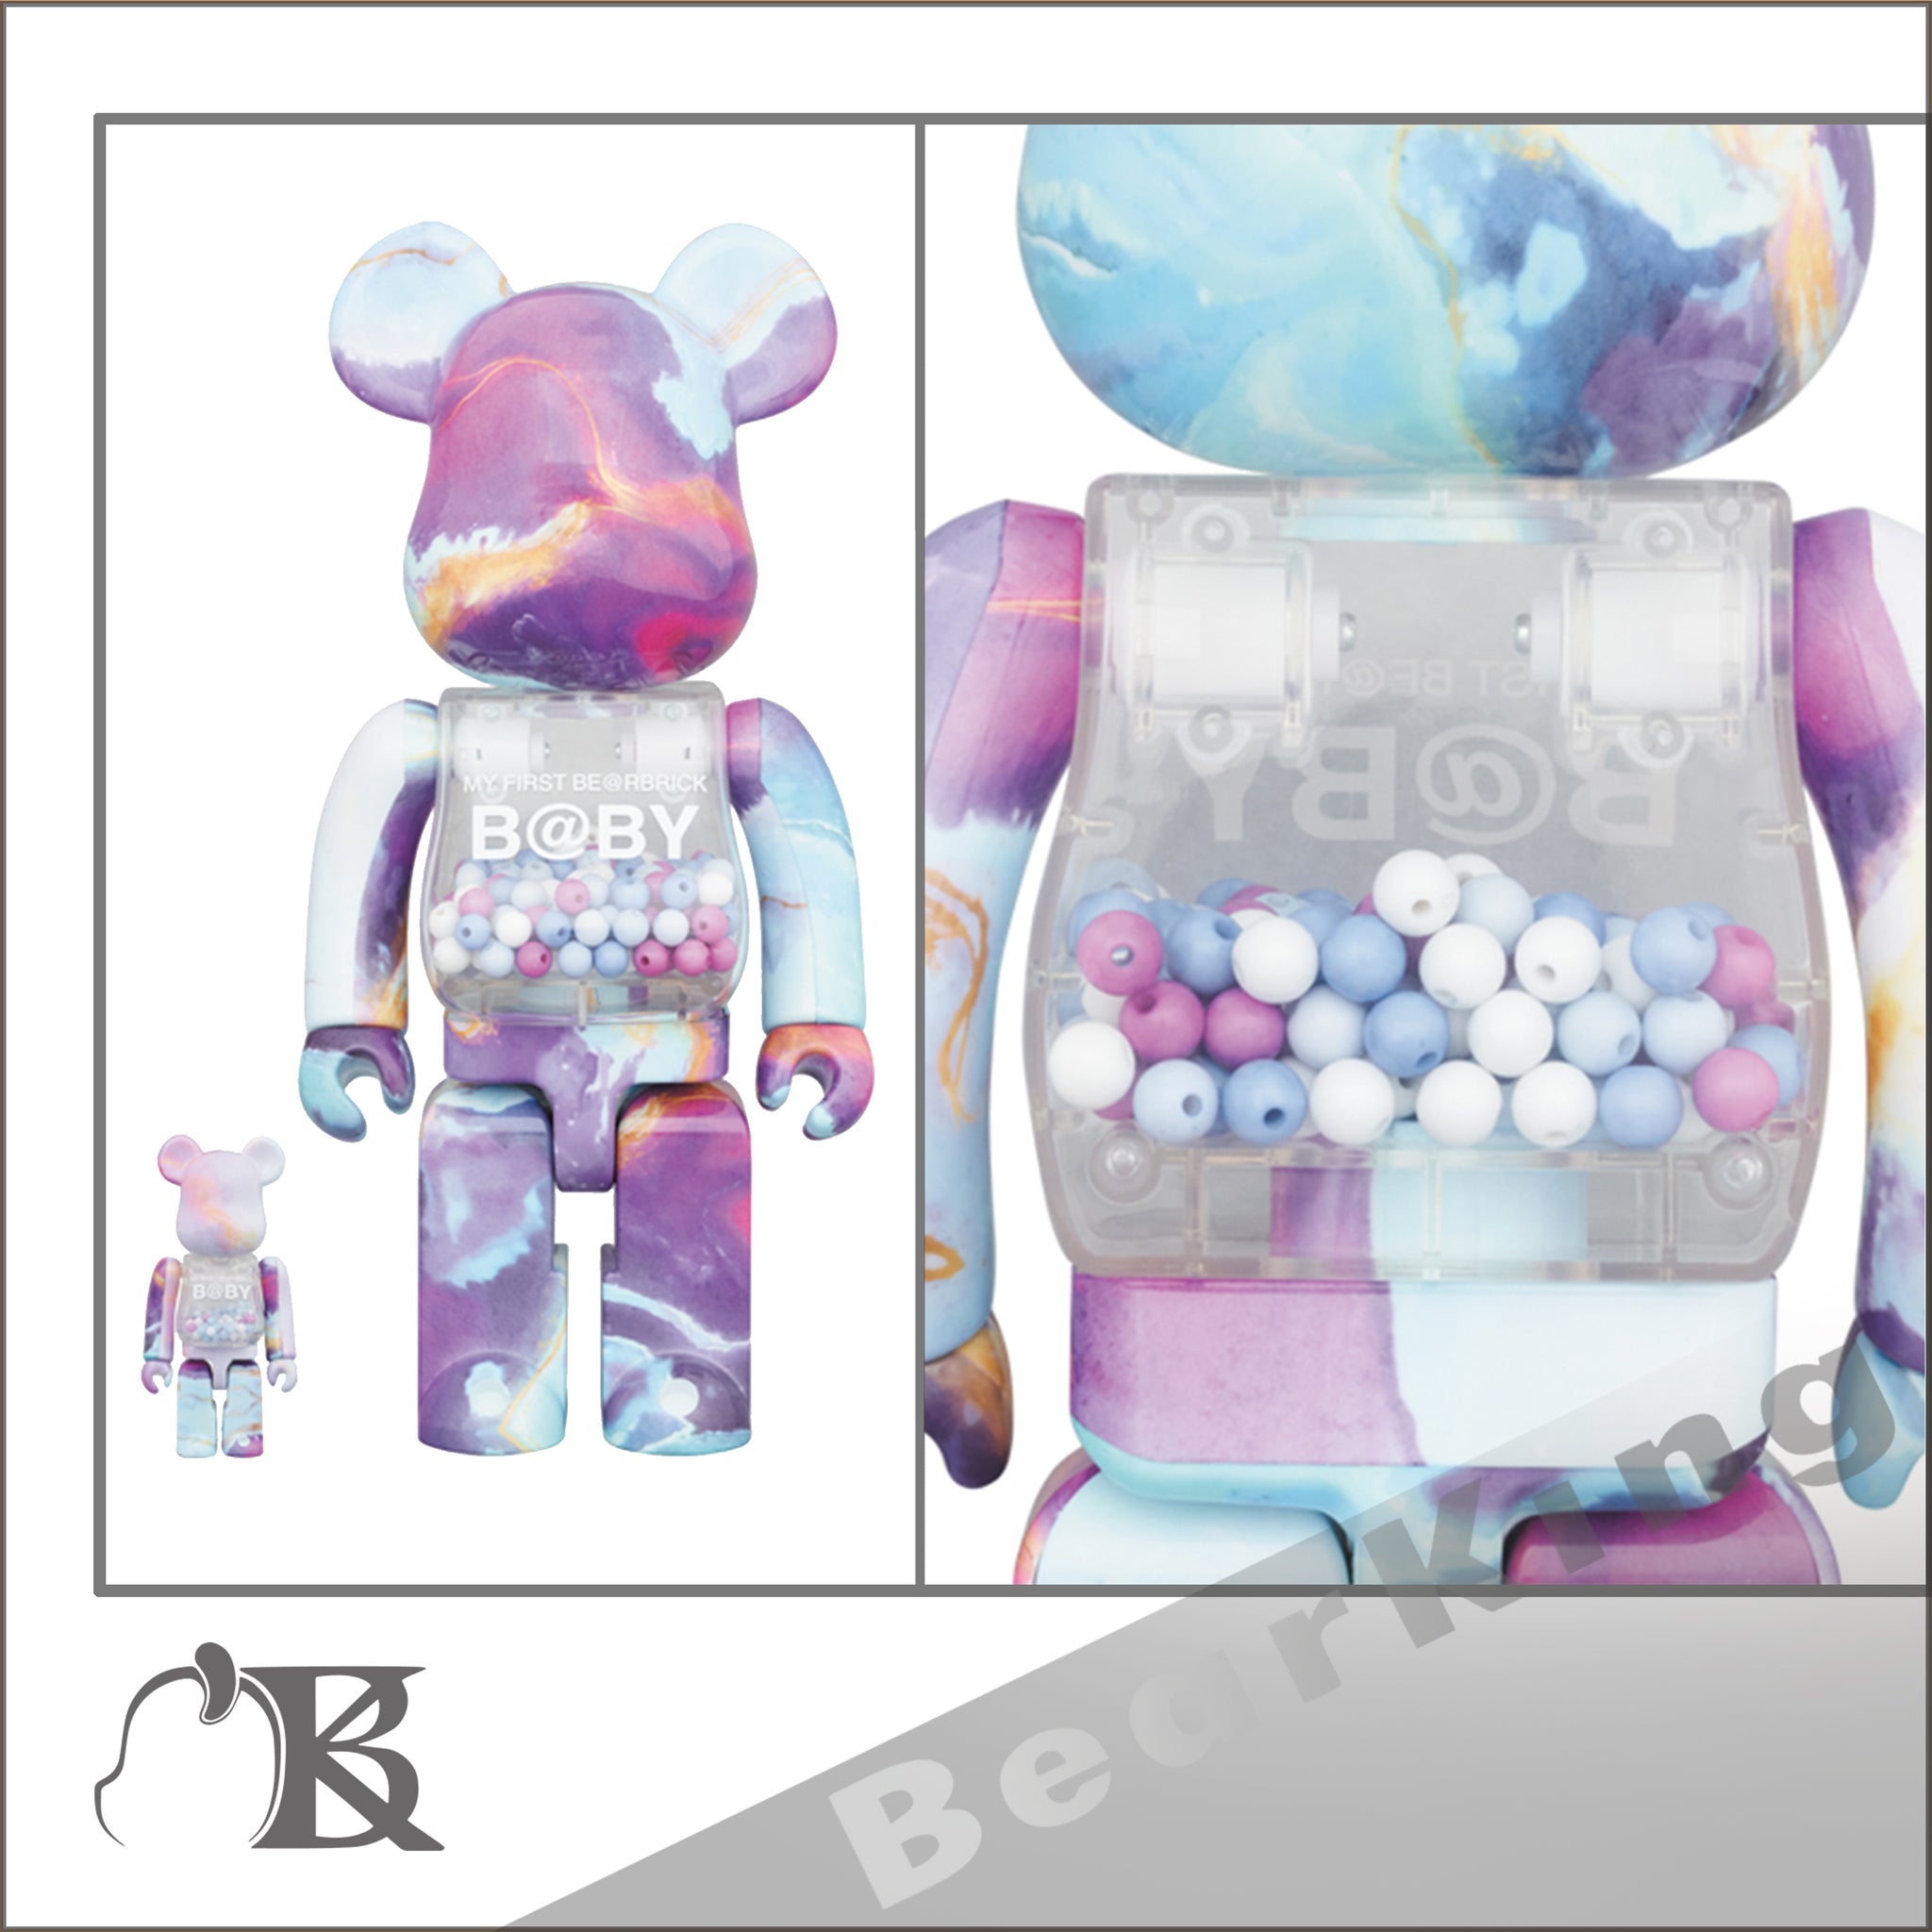 MY FIRST BE@RBRICK B@BY MARBLE Ver. 100％ & 400％ 千秋 Baby 雲石